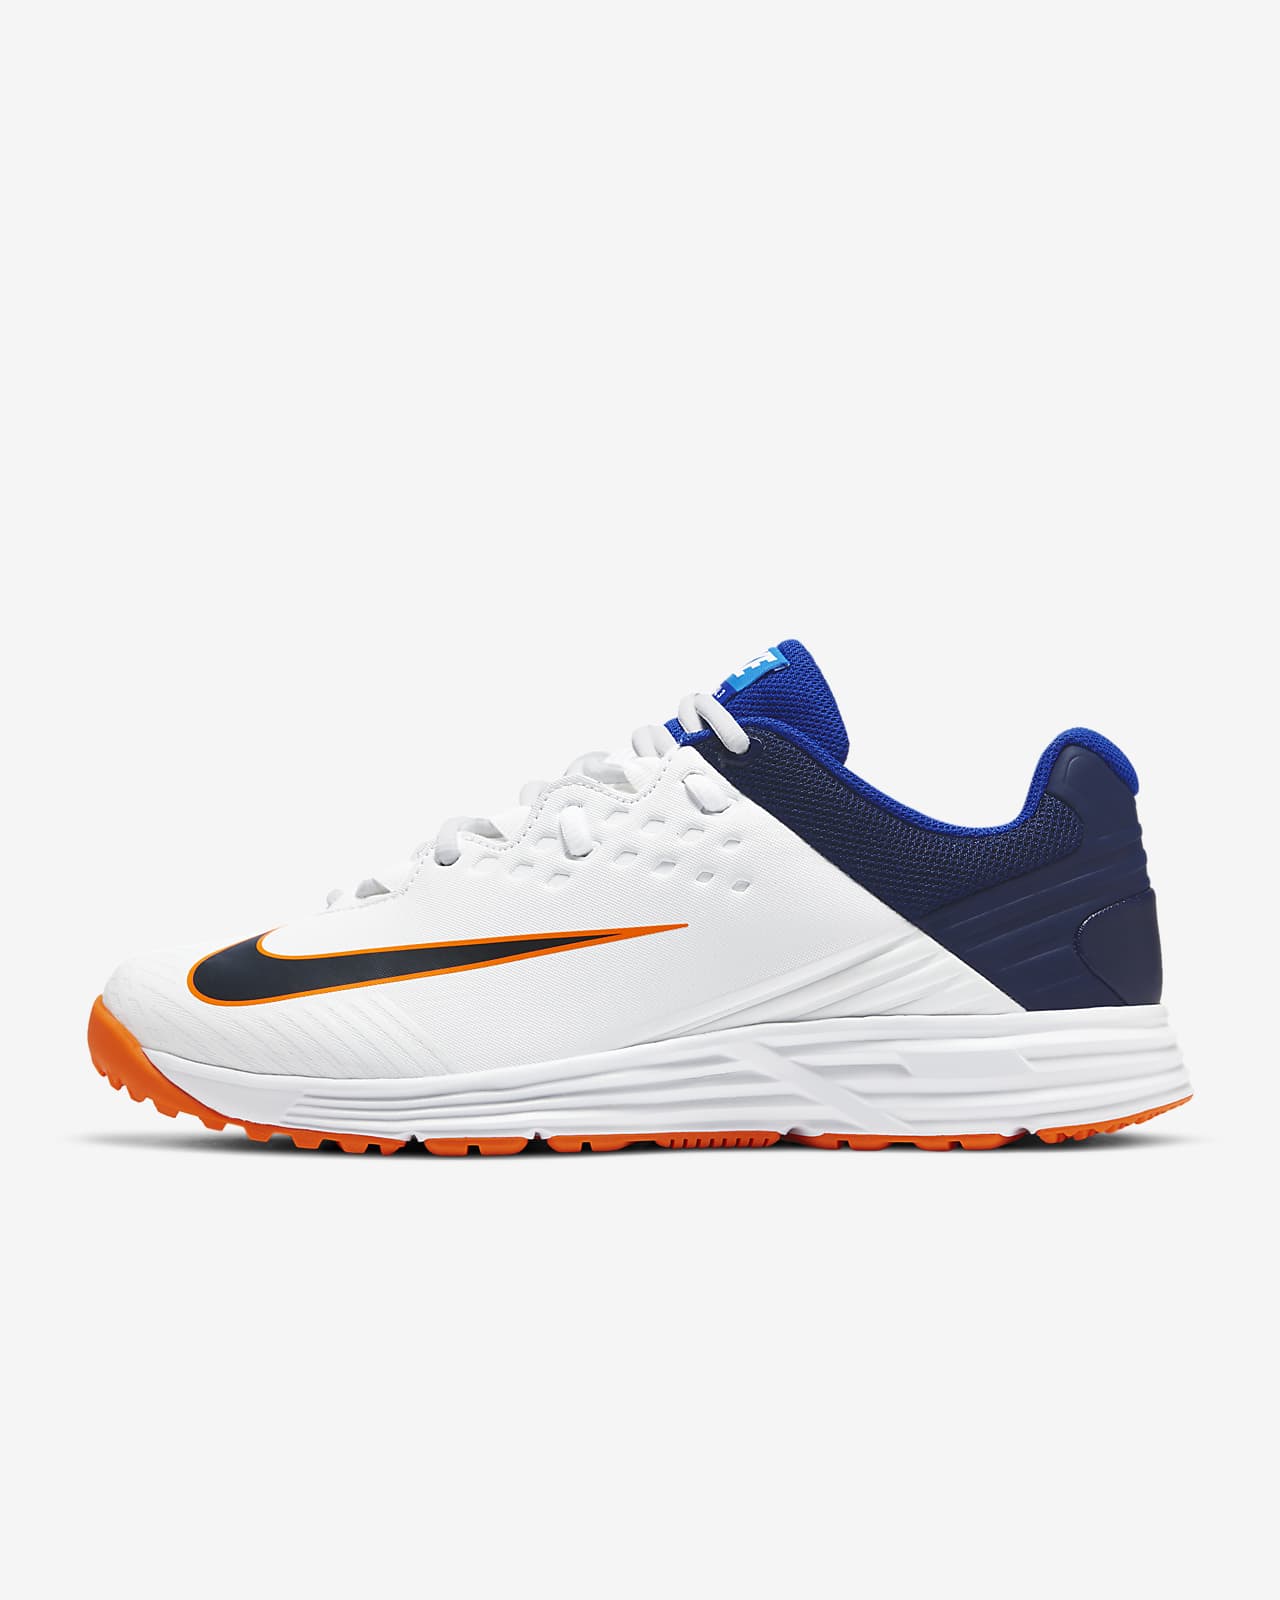 Nike Shoes For Cricket Slovakia, SAVE 54% - icarus.photos